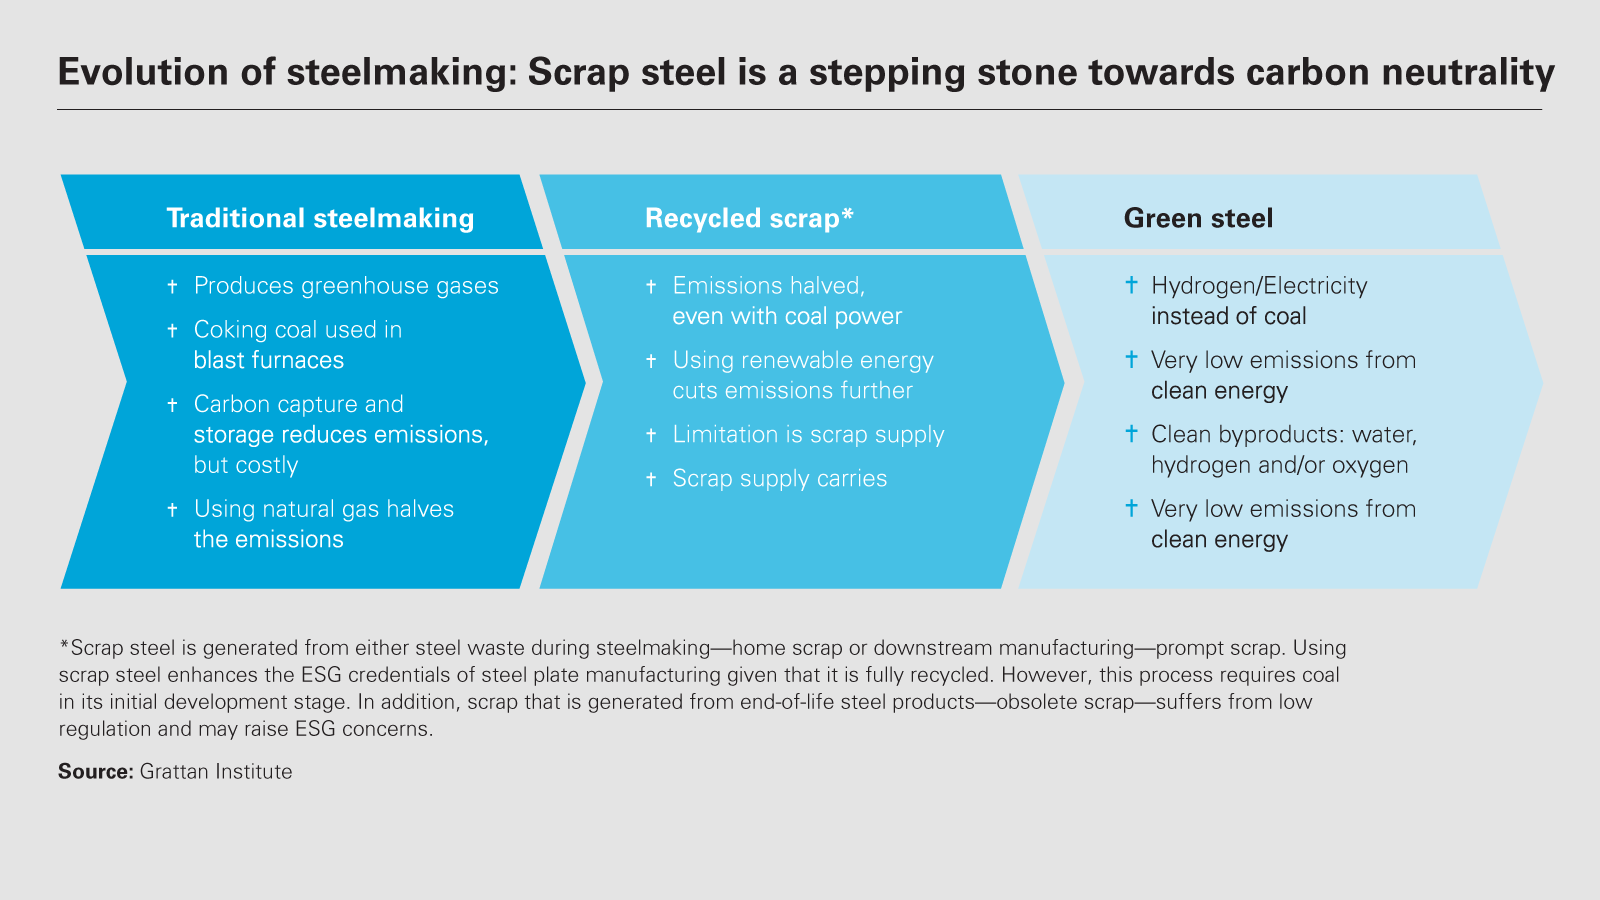 Evolution of steelmaking: Scrap steel is a stepping stone towards carbon neutrality (PDF)